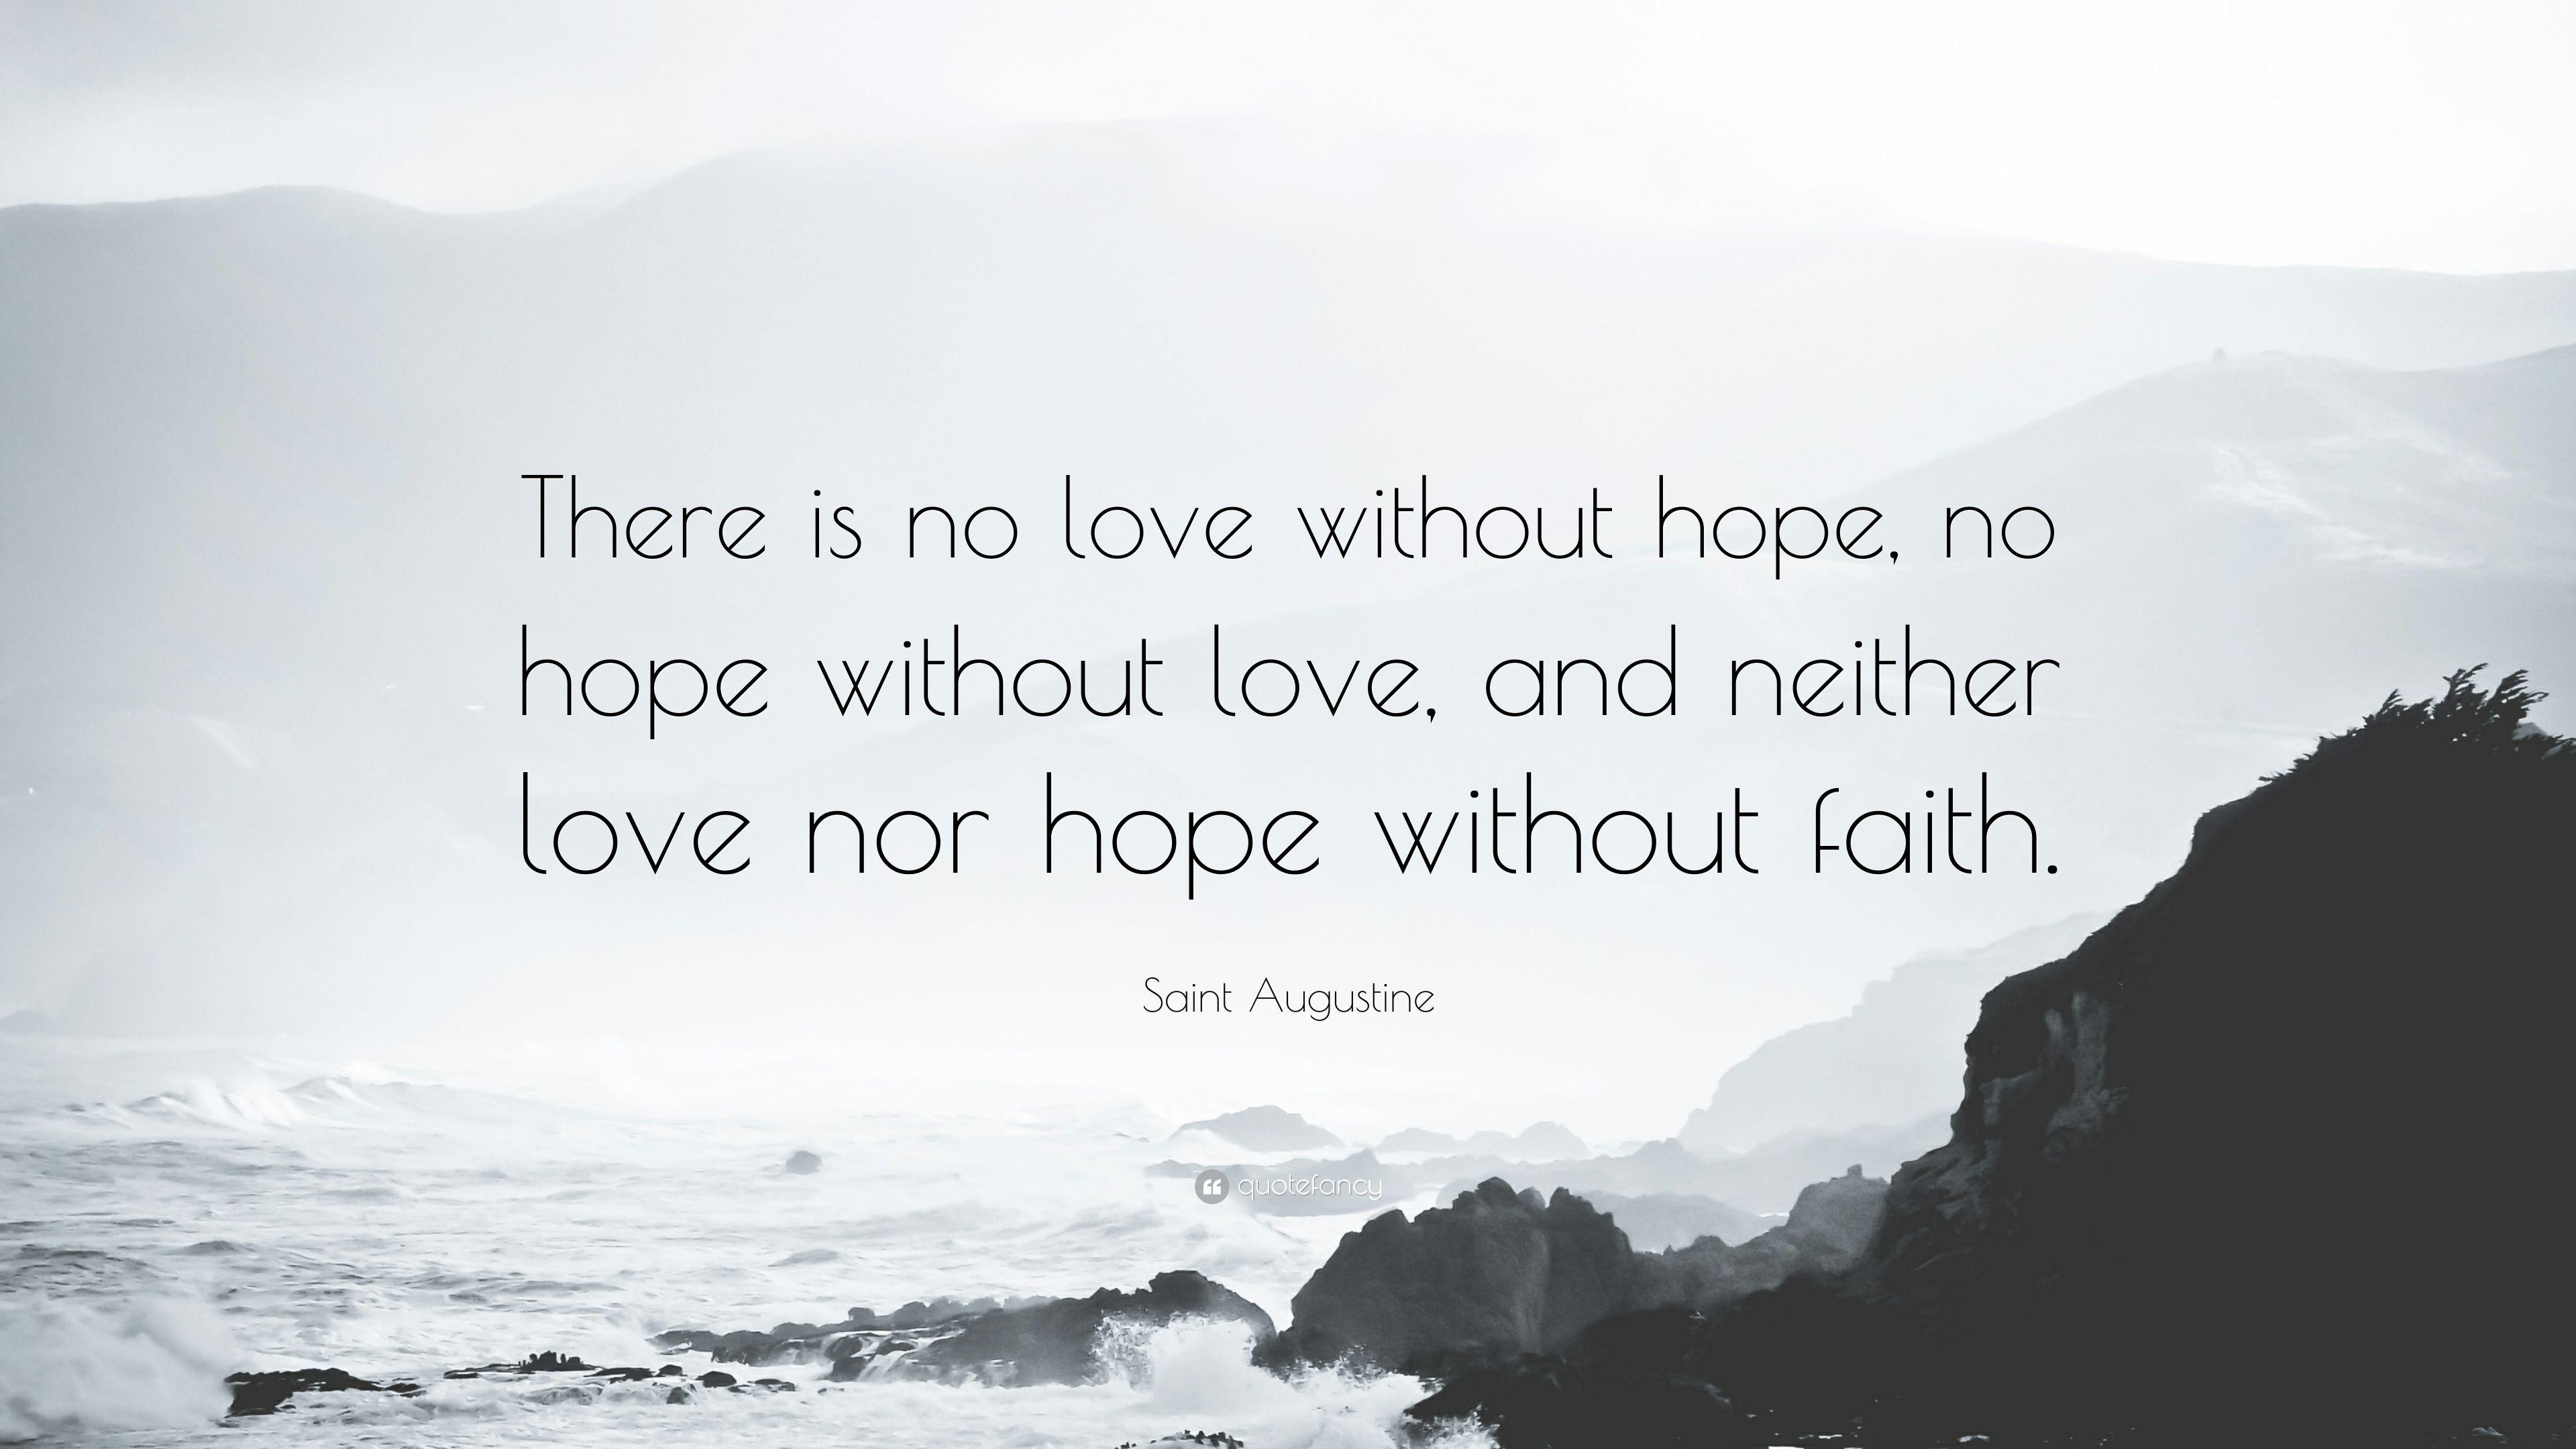 Saint Augustine Quote: “There is no love without hope, no hope